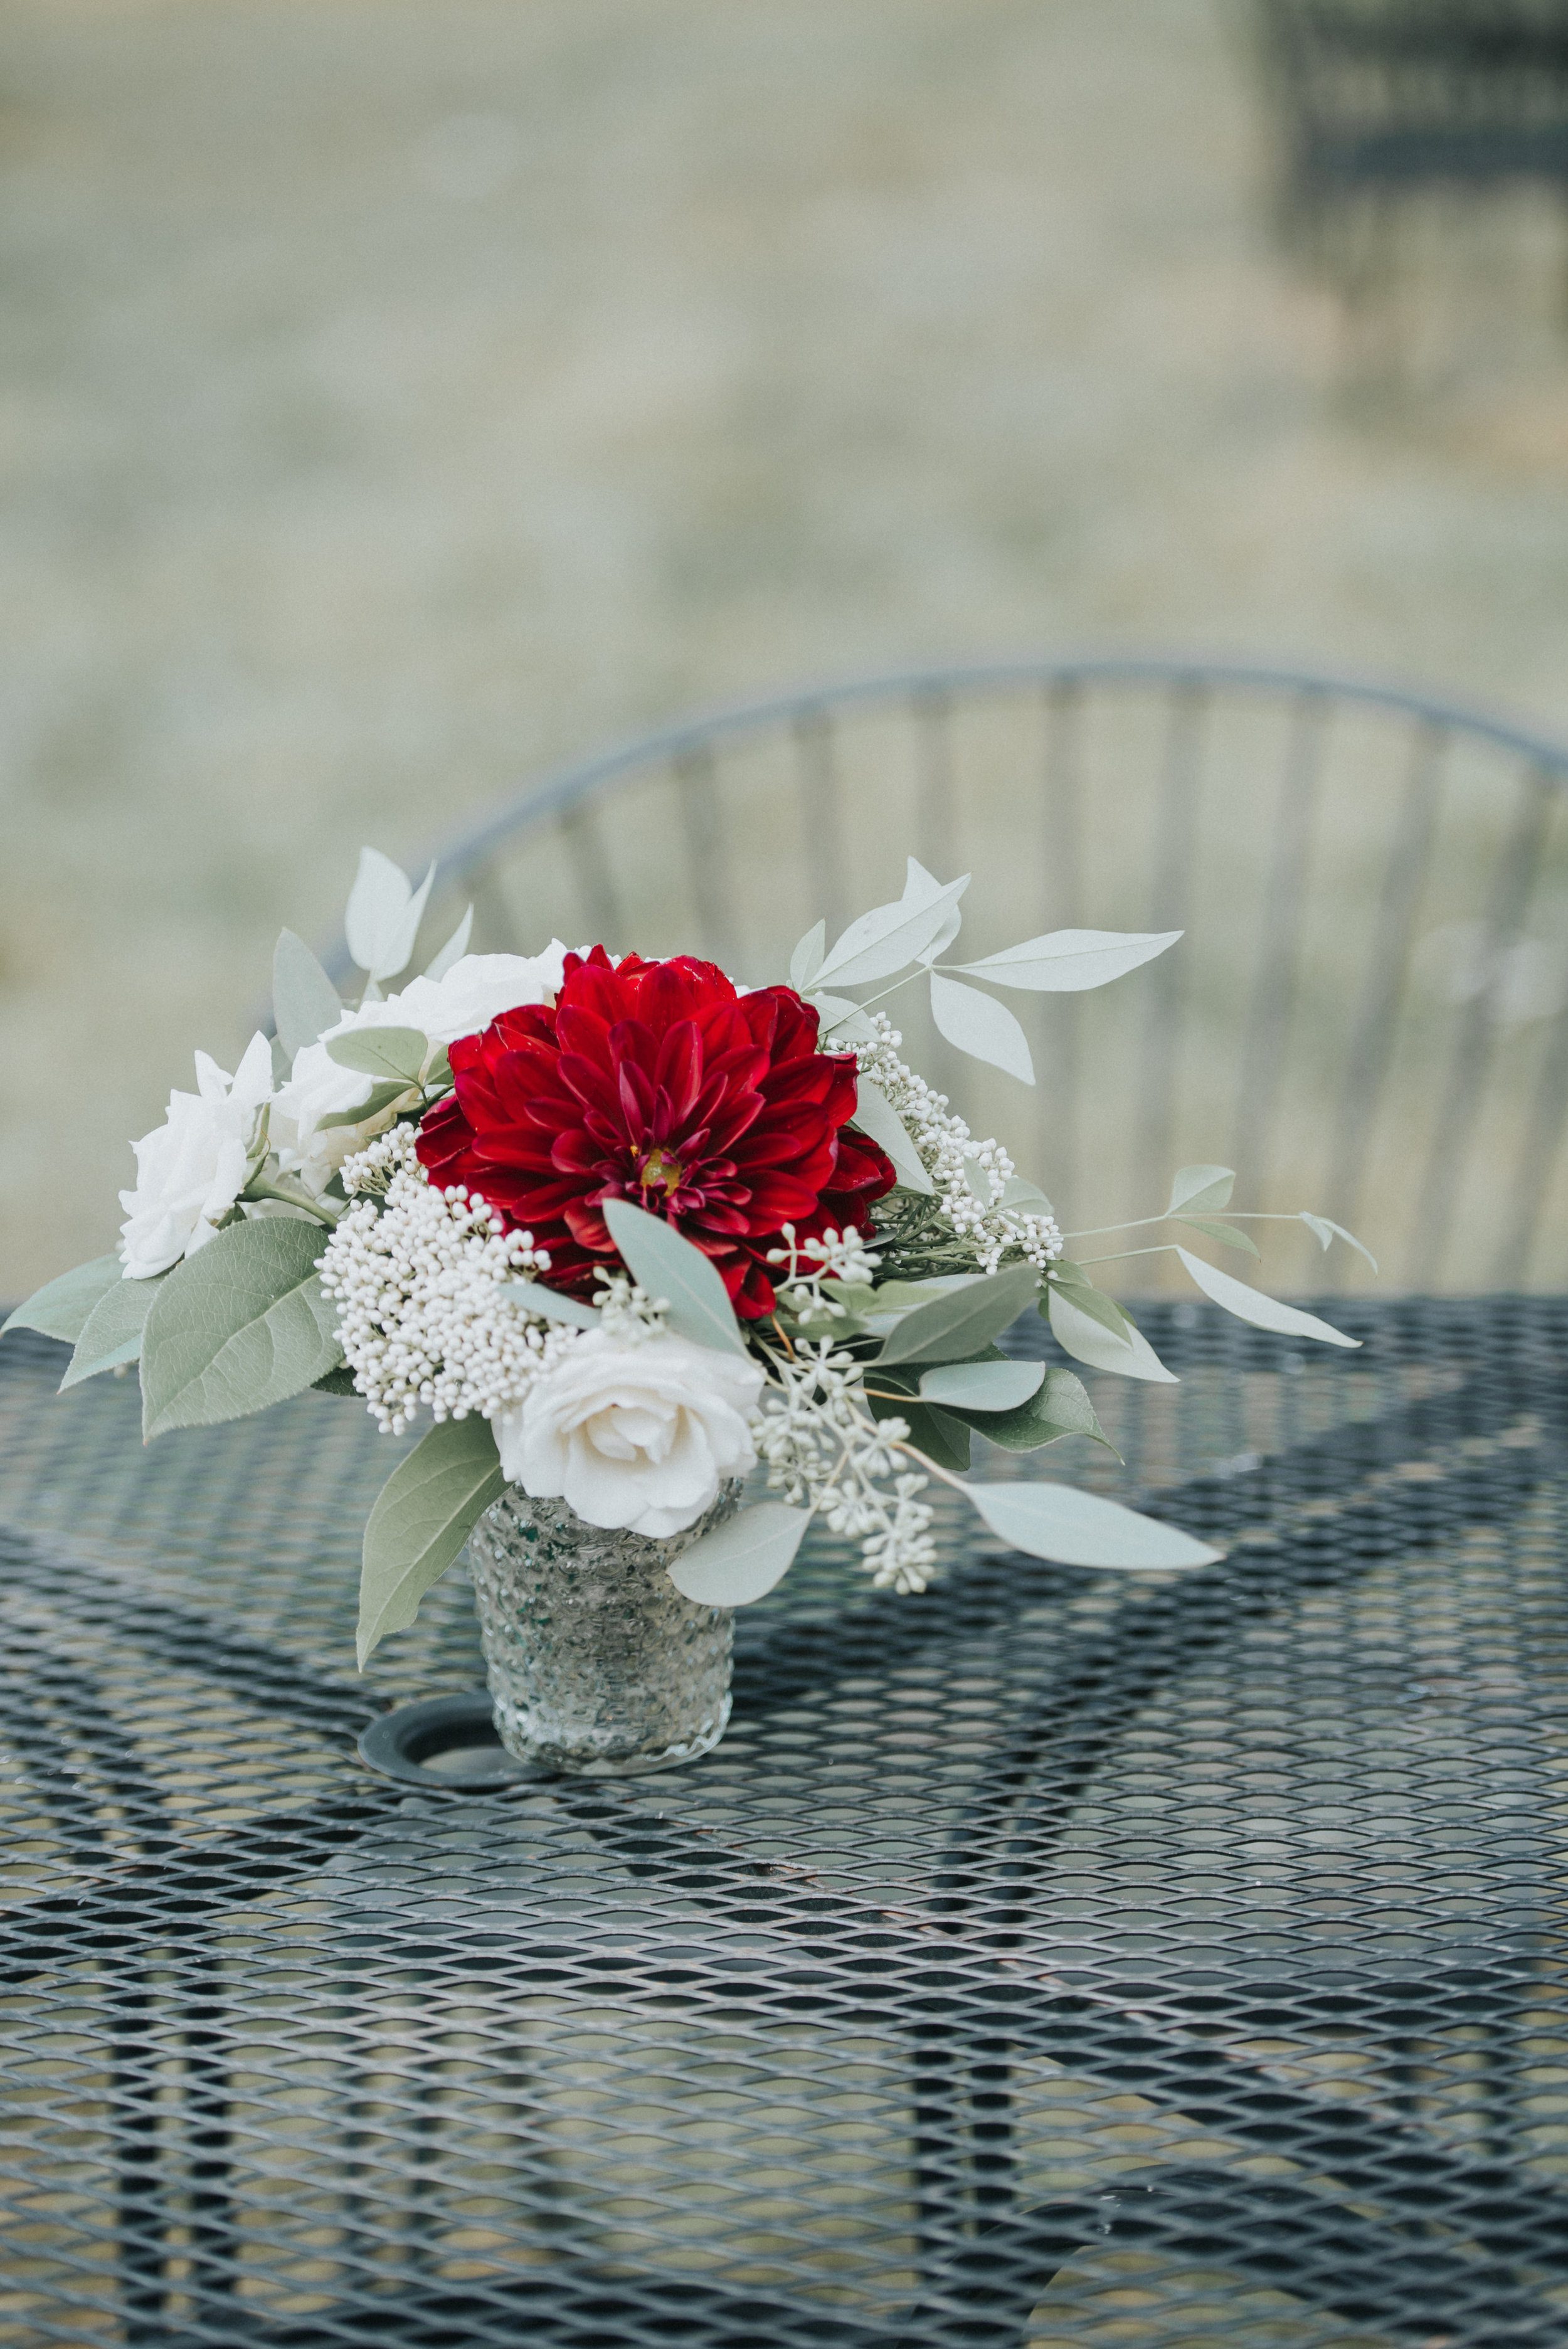 A vibrant red Dahlia on a table meant for lounging. Photography by Purple Fern.